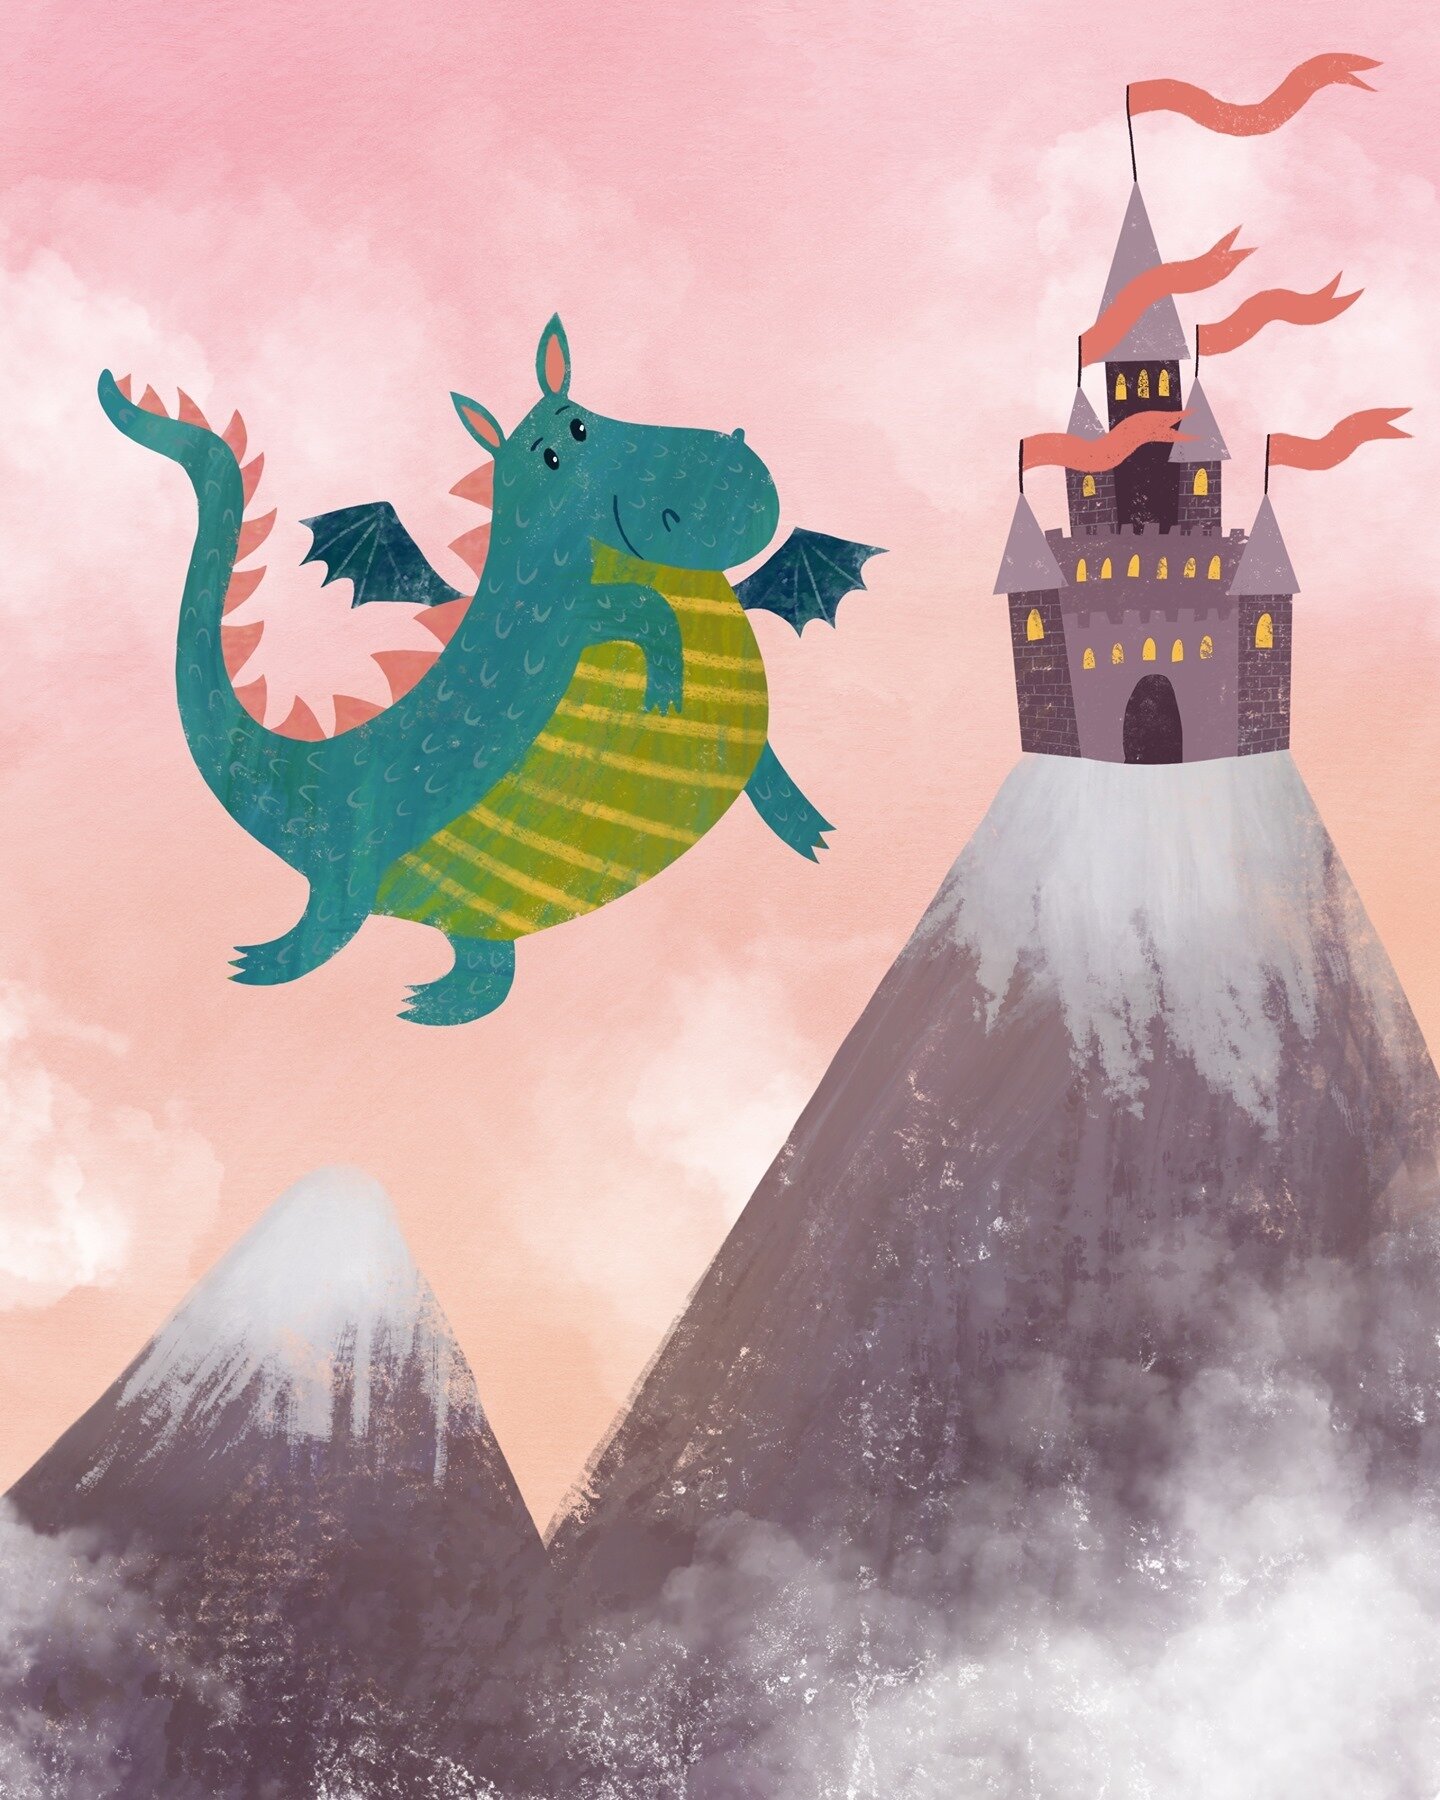 A friendly dragon flying up to say hello and a little bit of fairy tale magic to close out the week 🏰 ❤️⁠
.⁠
.⁠
.⁠
.⁠
.⁠
.⁠
.⁠
.⁠
.⁠
.⁠
#childrenswriterguild #kidsbookillustrator #illustrationsforchildren #illustrationsforkids #kidsbookillustration 